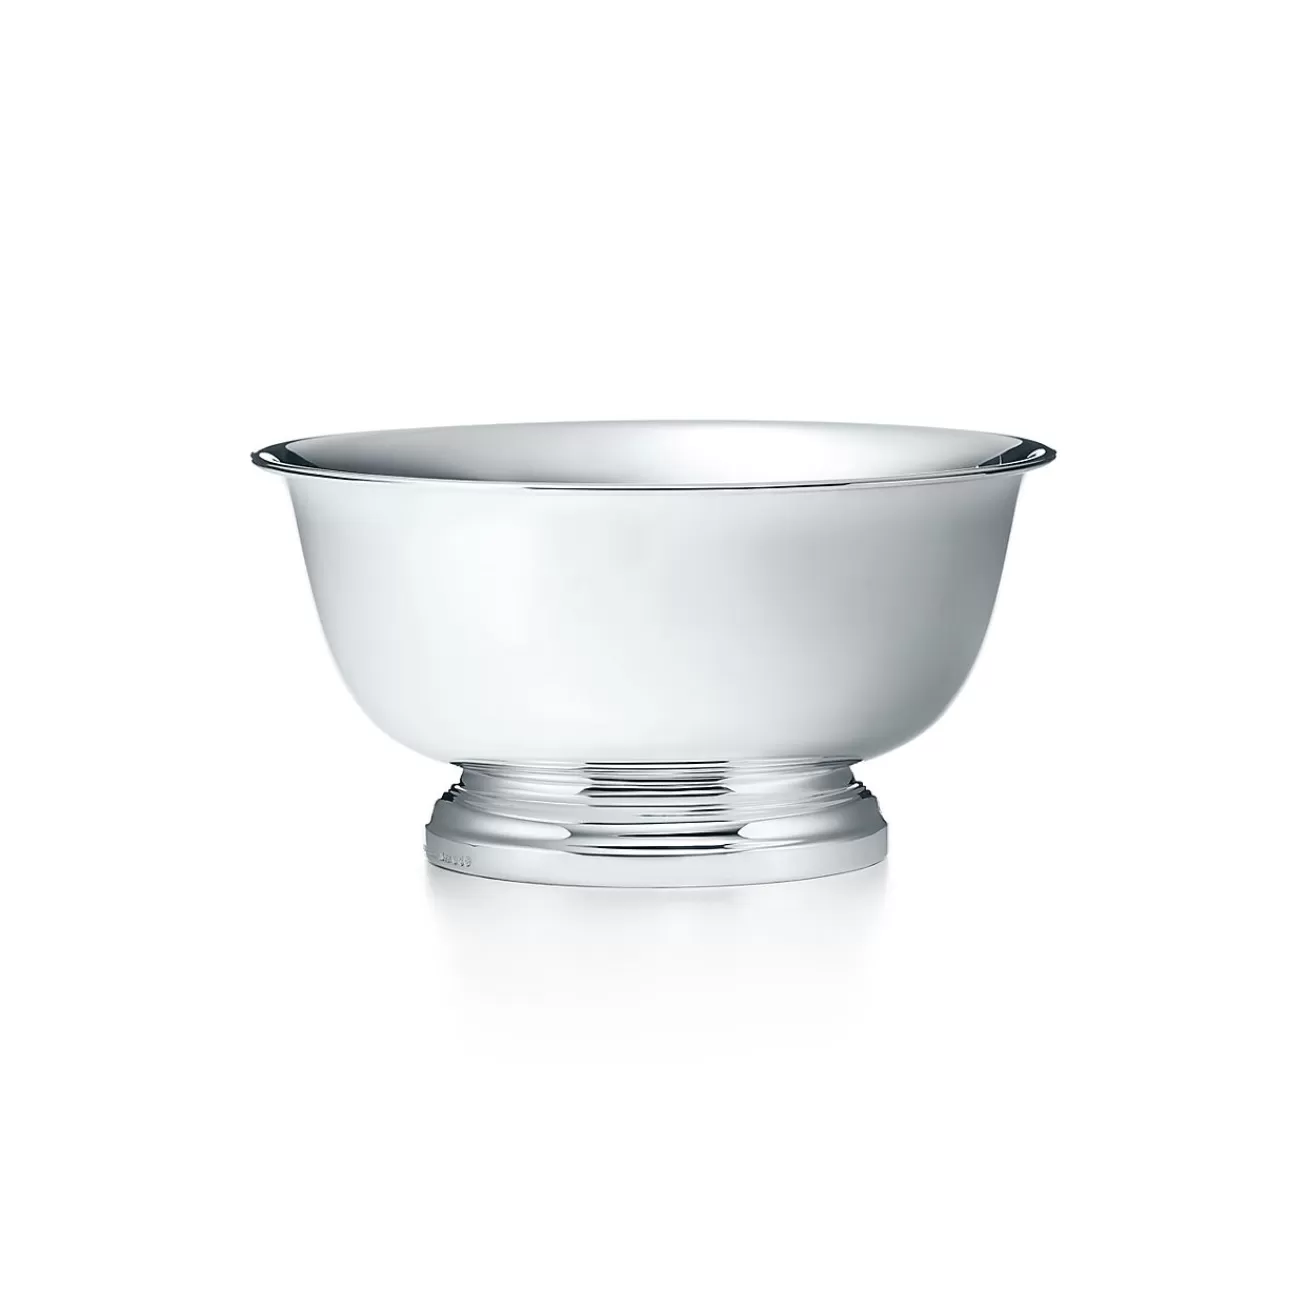 Tiffany & Co. Dog bowl in sterling silver, large. | ^ Stationery, Games & Unique Objects | Games & Novelties